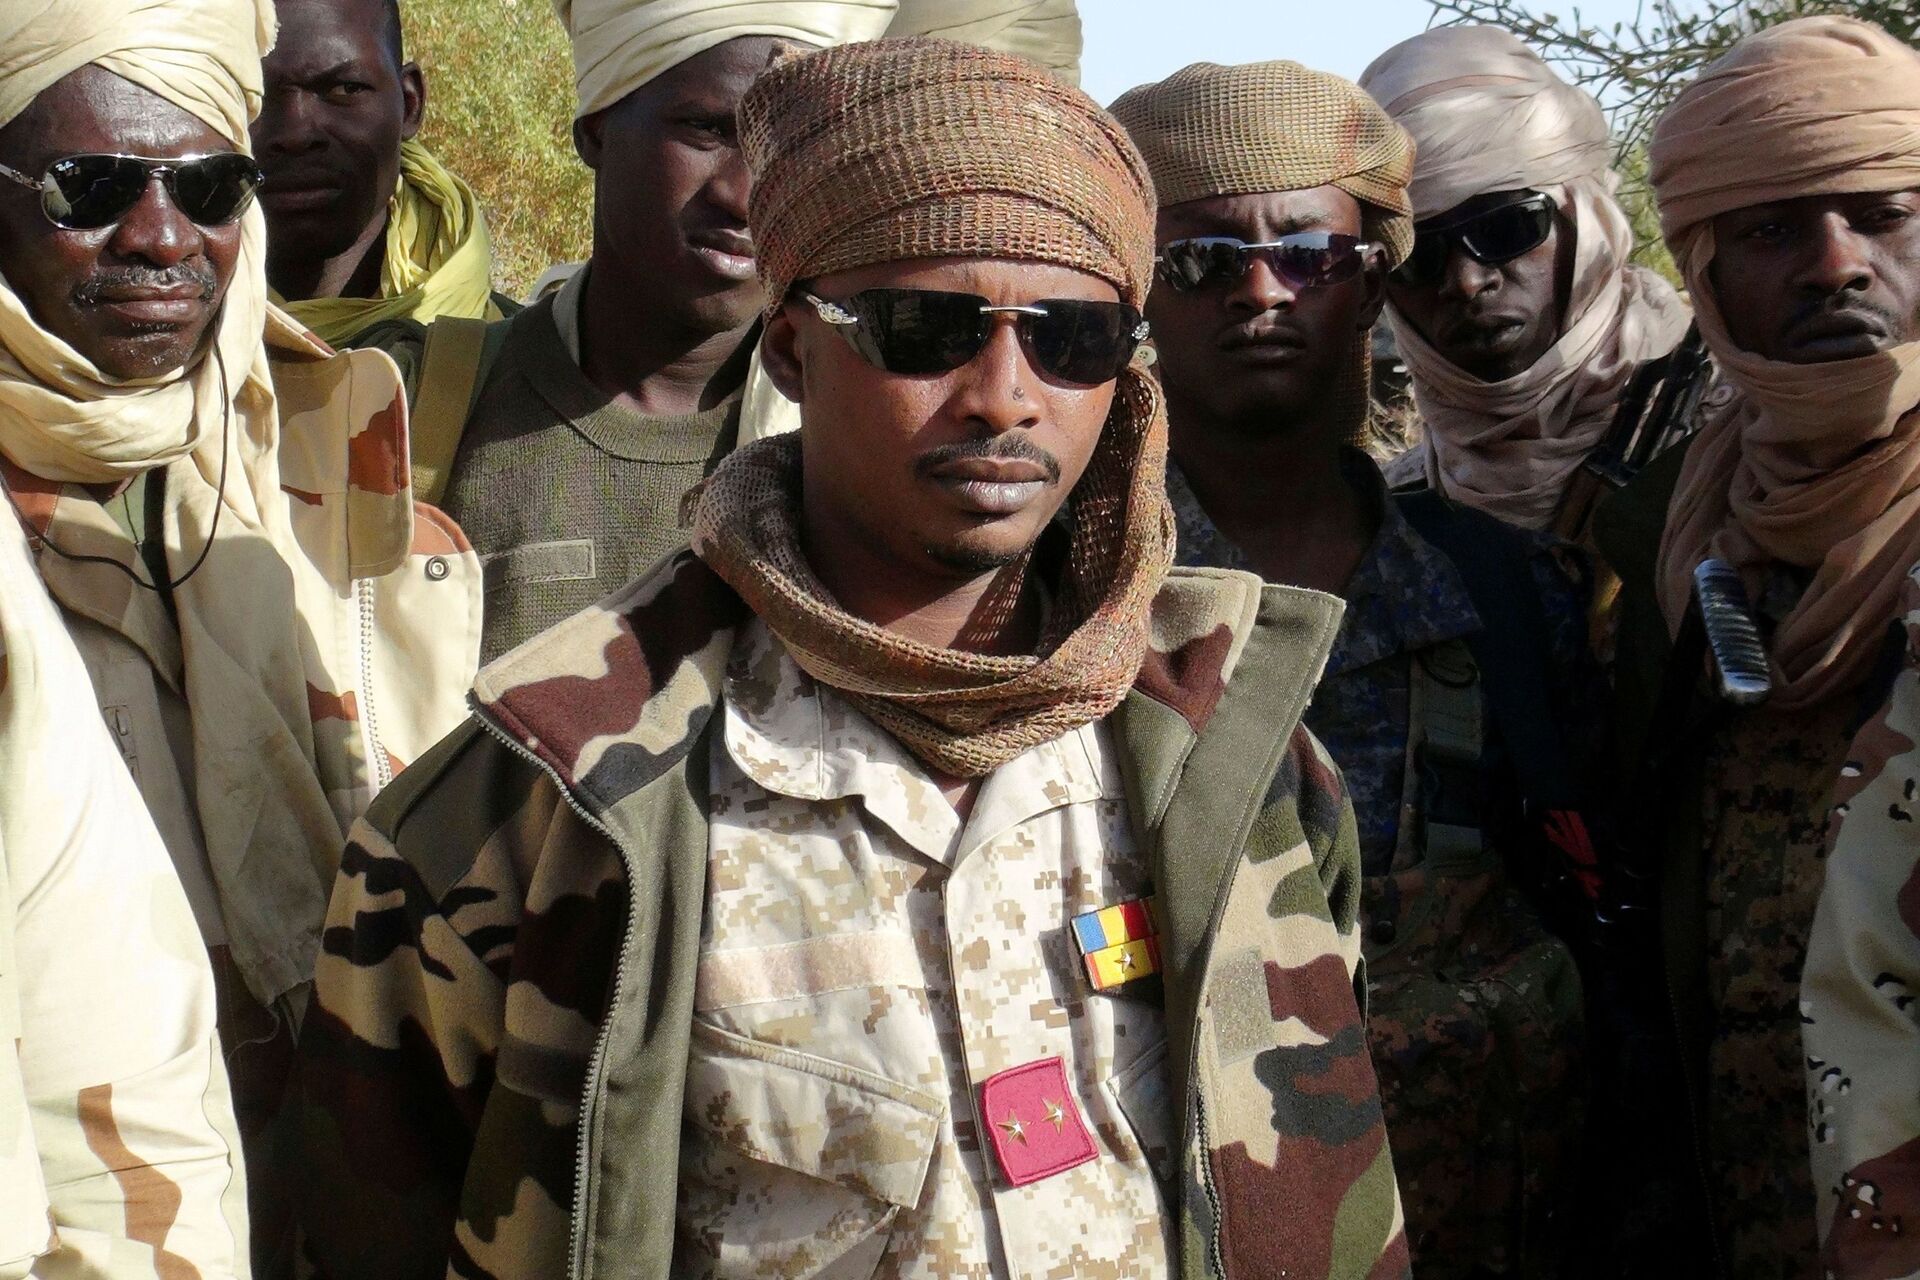 The son of Chad's late president Idriss Deby, Mahamat Idriss Deby Itno (also known as Mahamat Kaka) and Chadian army officers gather in the northeastern town of Kidal, Mali, February 7, 2013 - Sputnik International, 1920, 07.09.2021